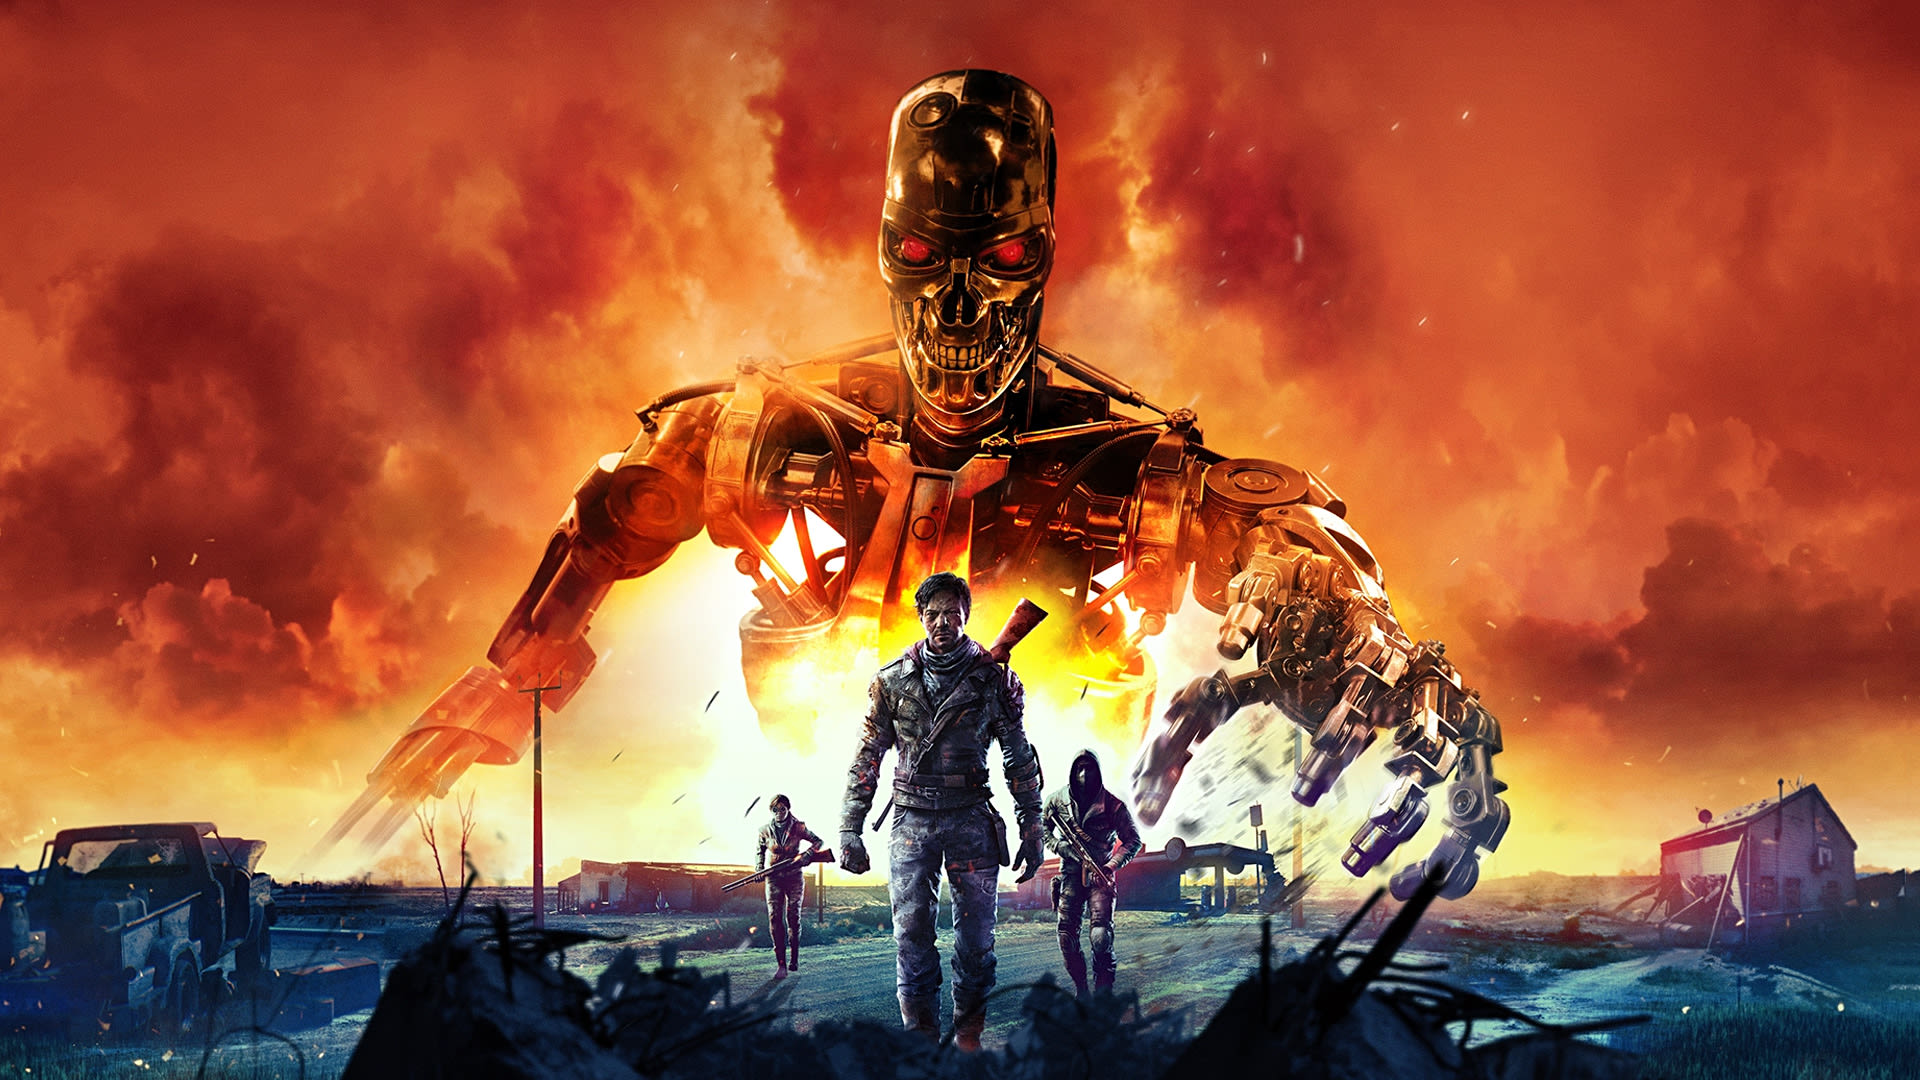 Terminator: Survivors is a UE5 Game, Will be Playable Offline, Only Feature a Single T-800